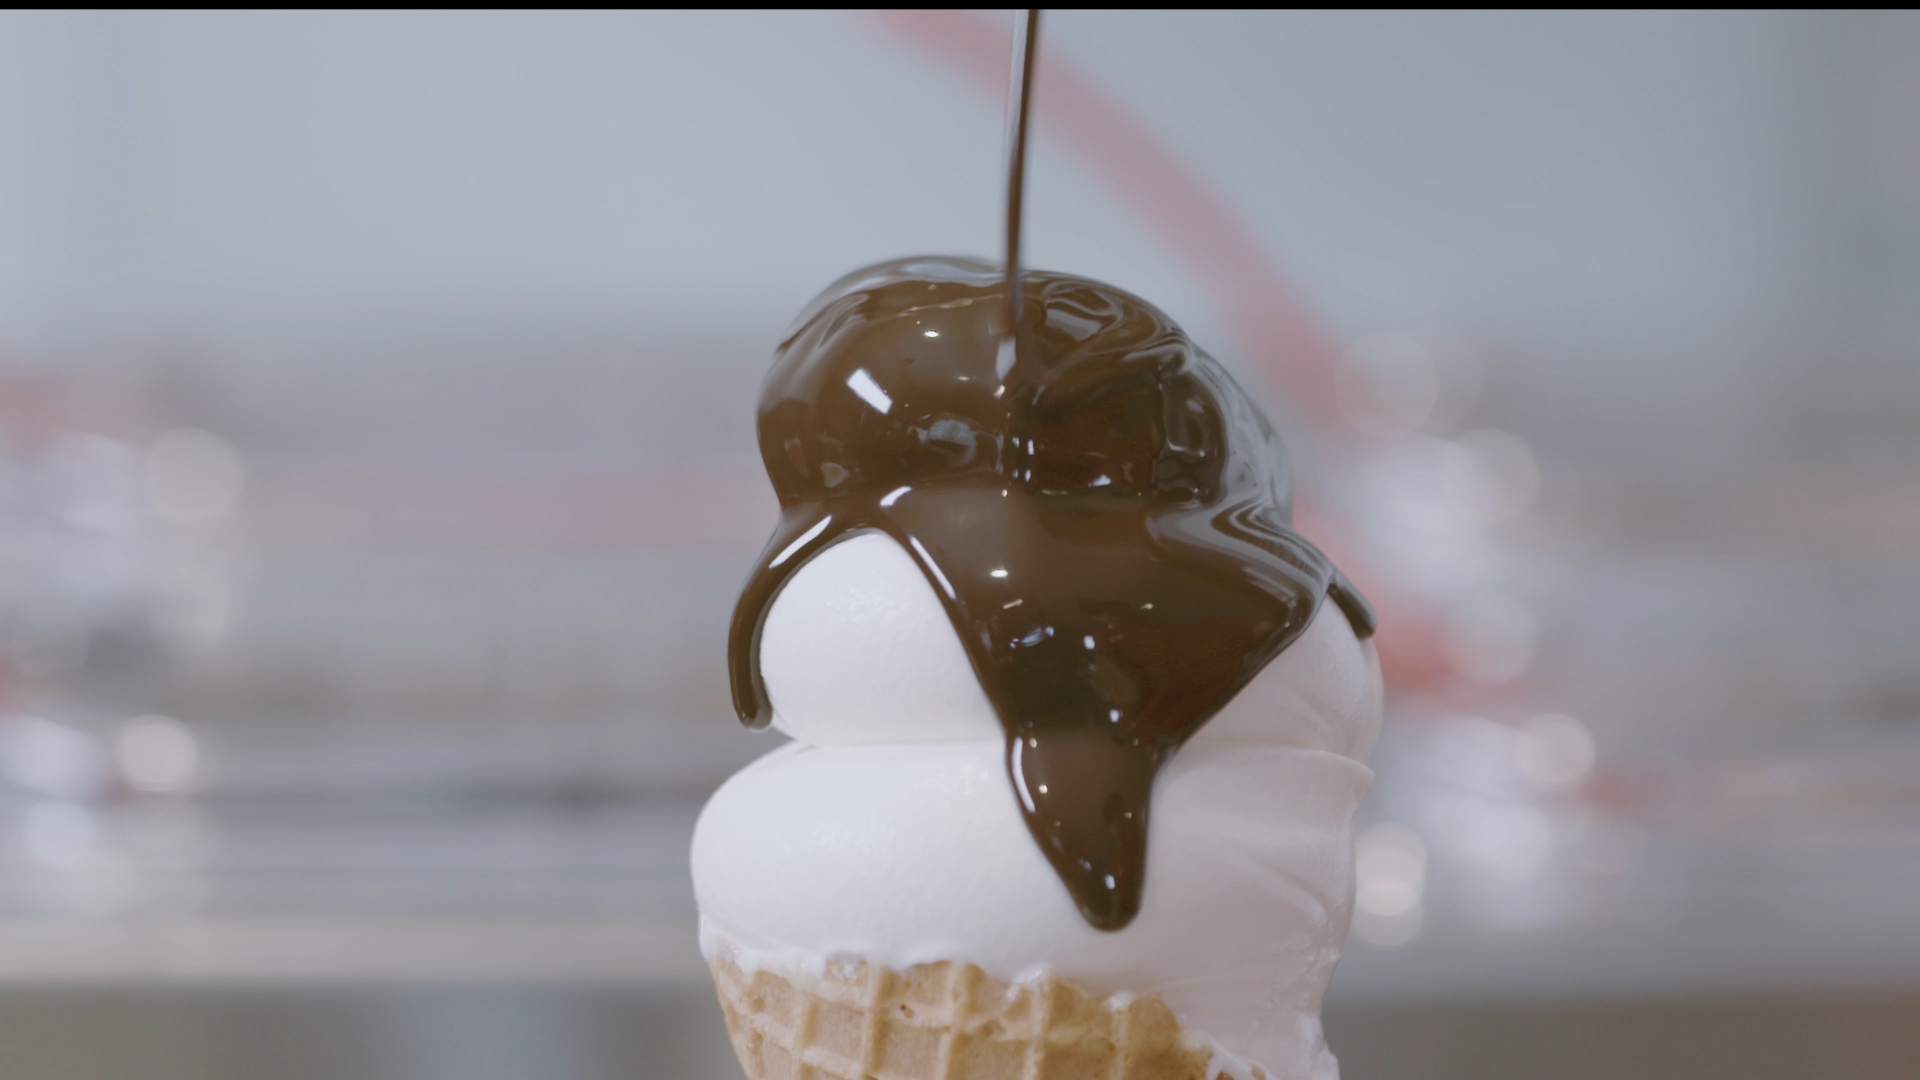 Krispy Kreme's one-of-a-kind soft serve ice cream launches initially in 10 markets the first day of summer and is available in shakes, cones and cups.